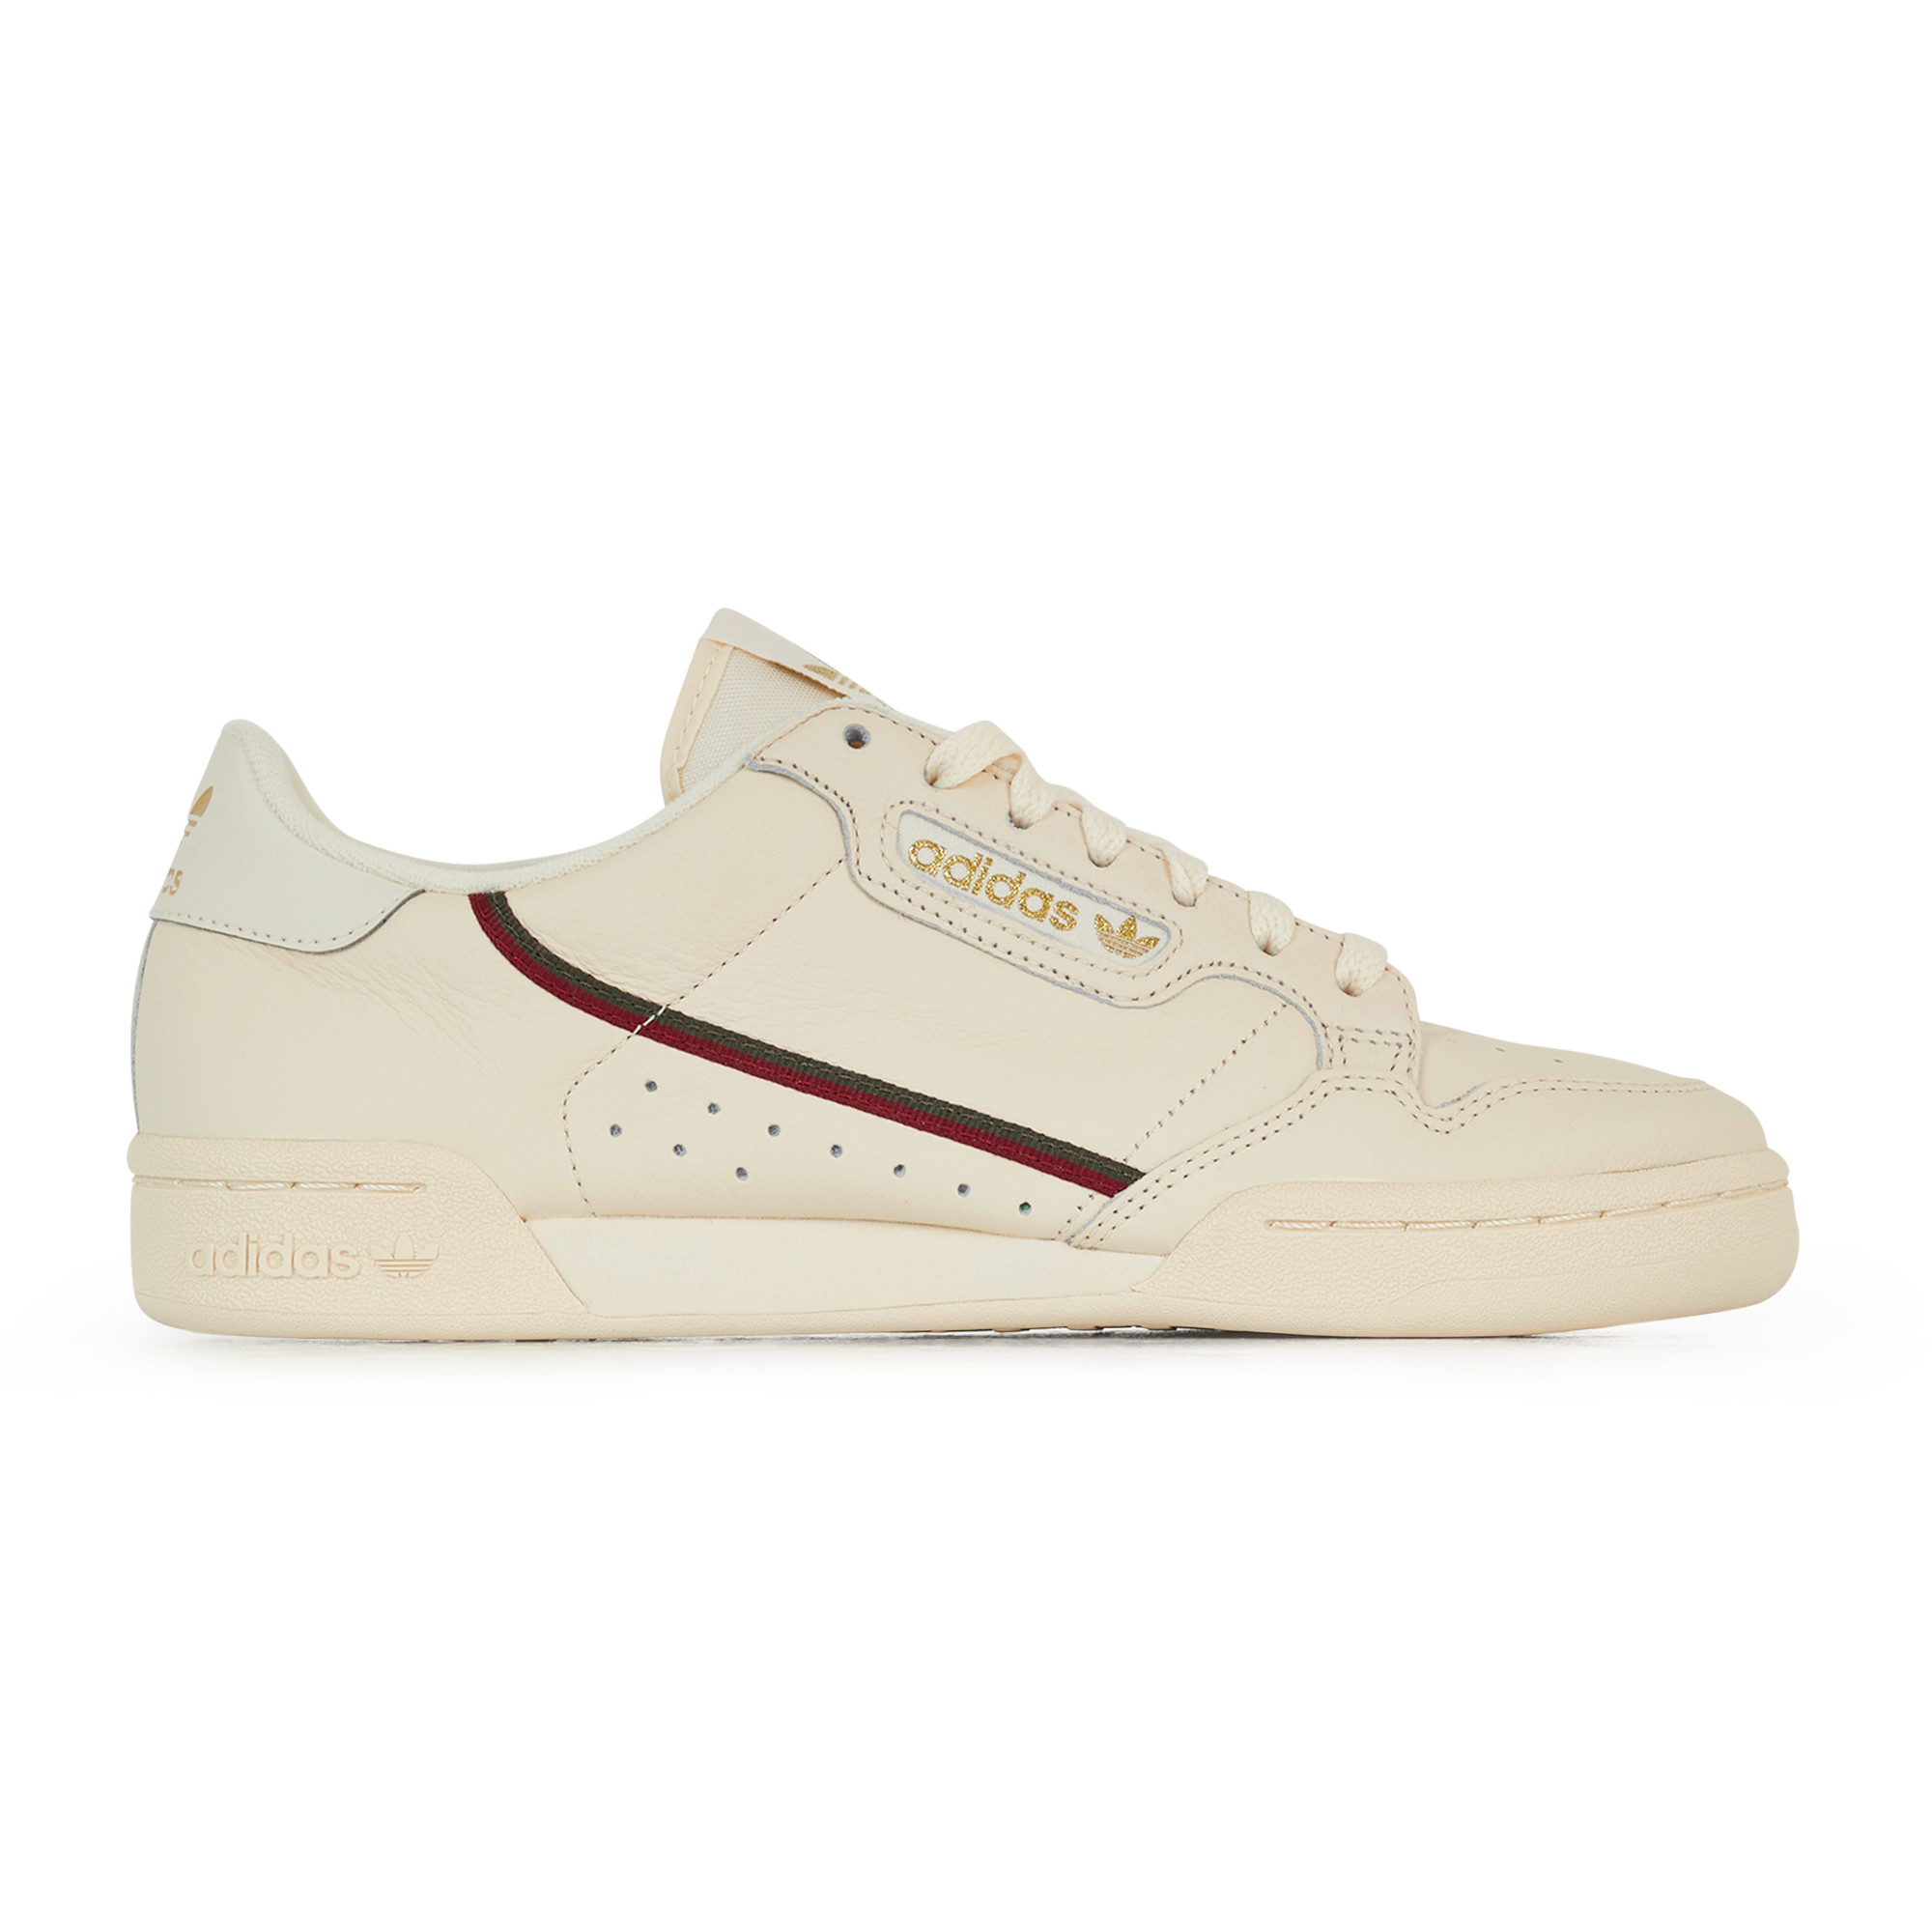 Buy > adidas continental bordeaux > in stock